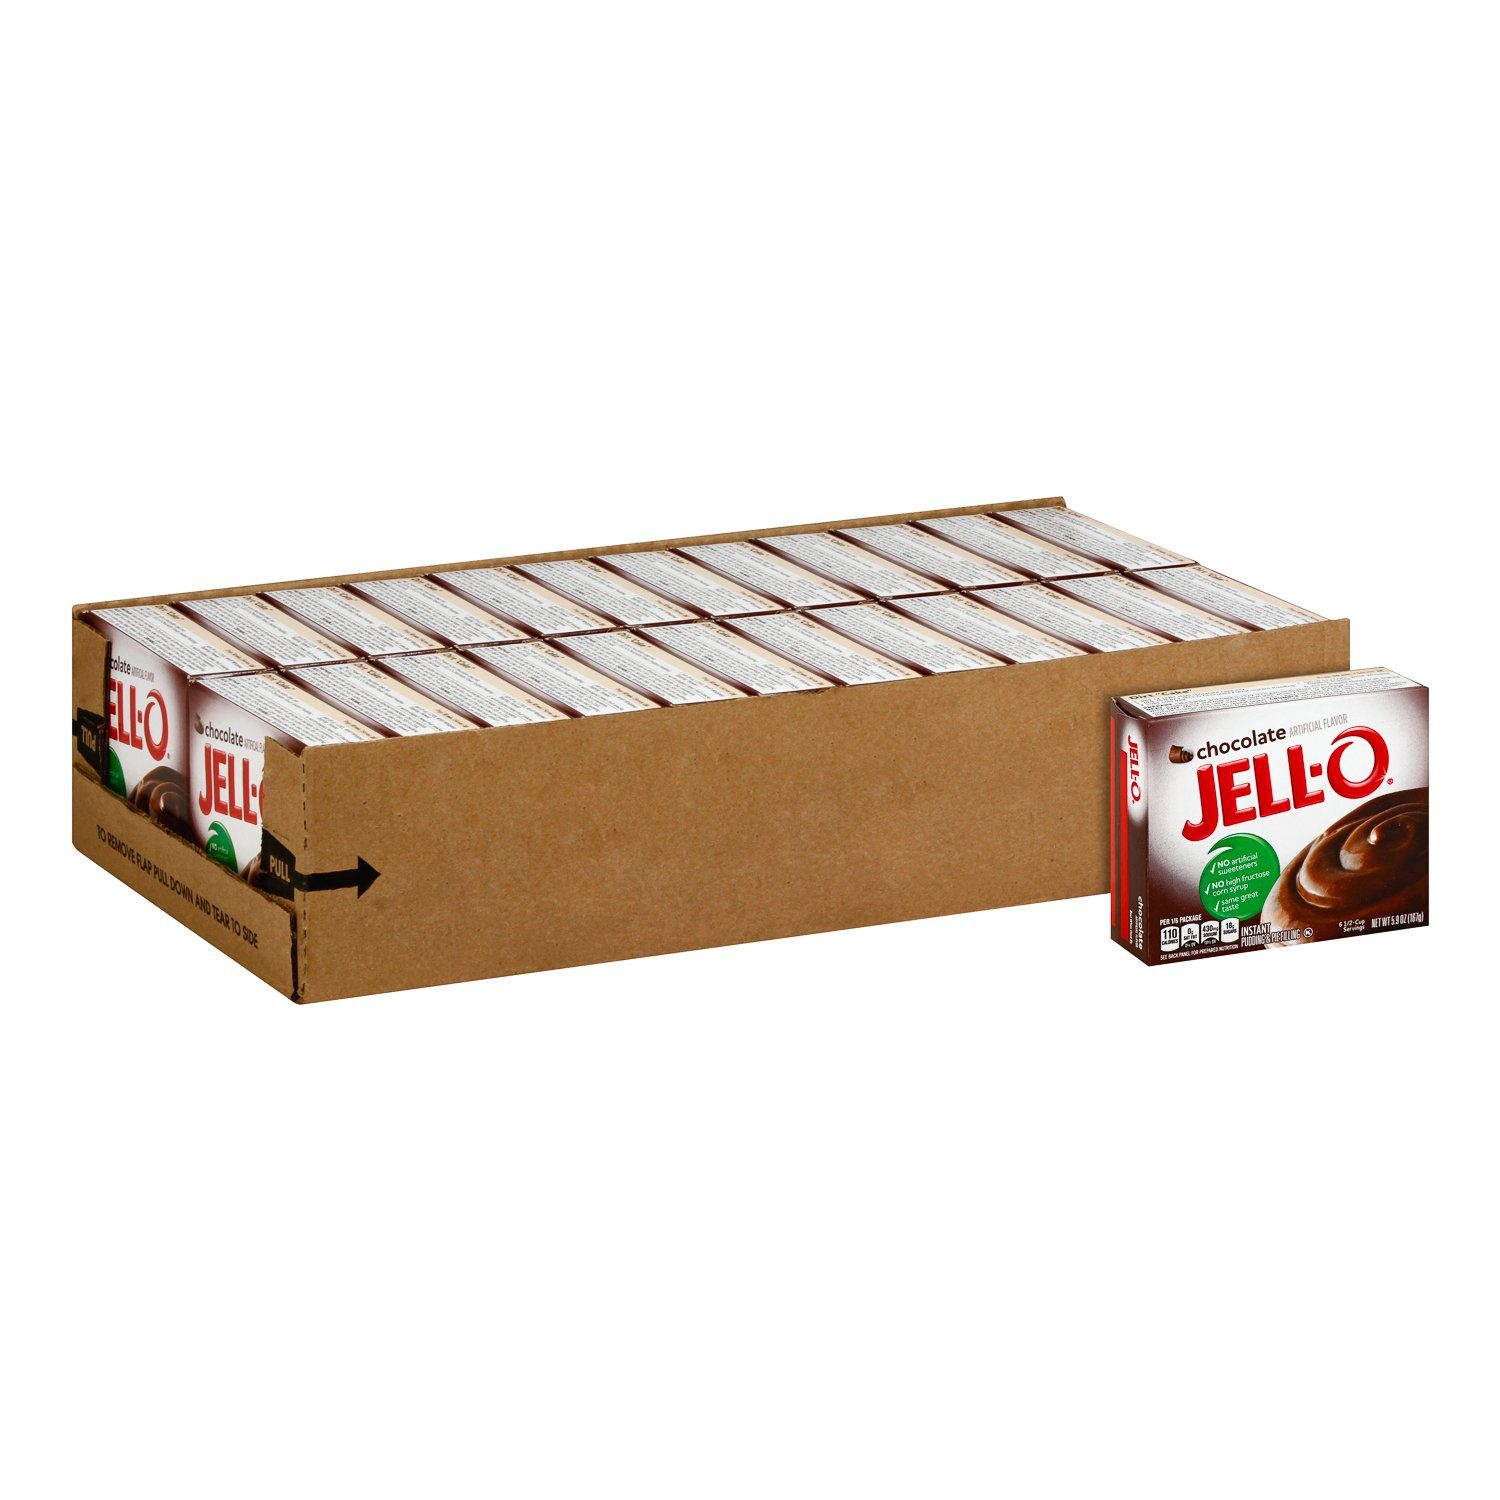 Jell-O Instant Pudding & Pie Filling Mixes Jell-O Chocolate 5.9 Oz-24 Count 